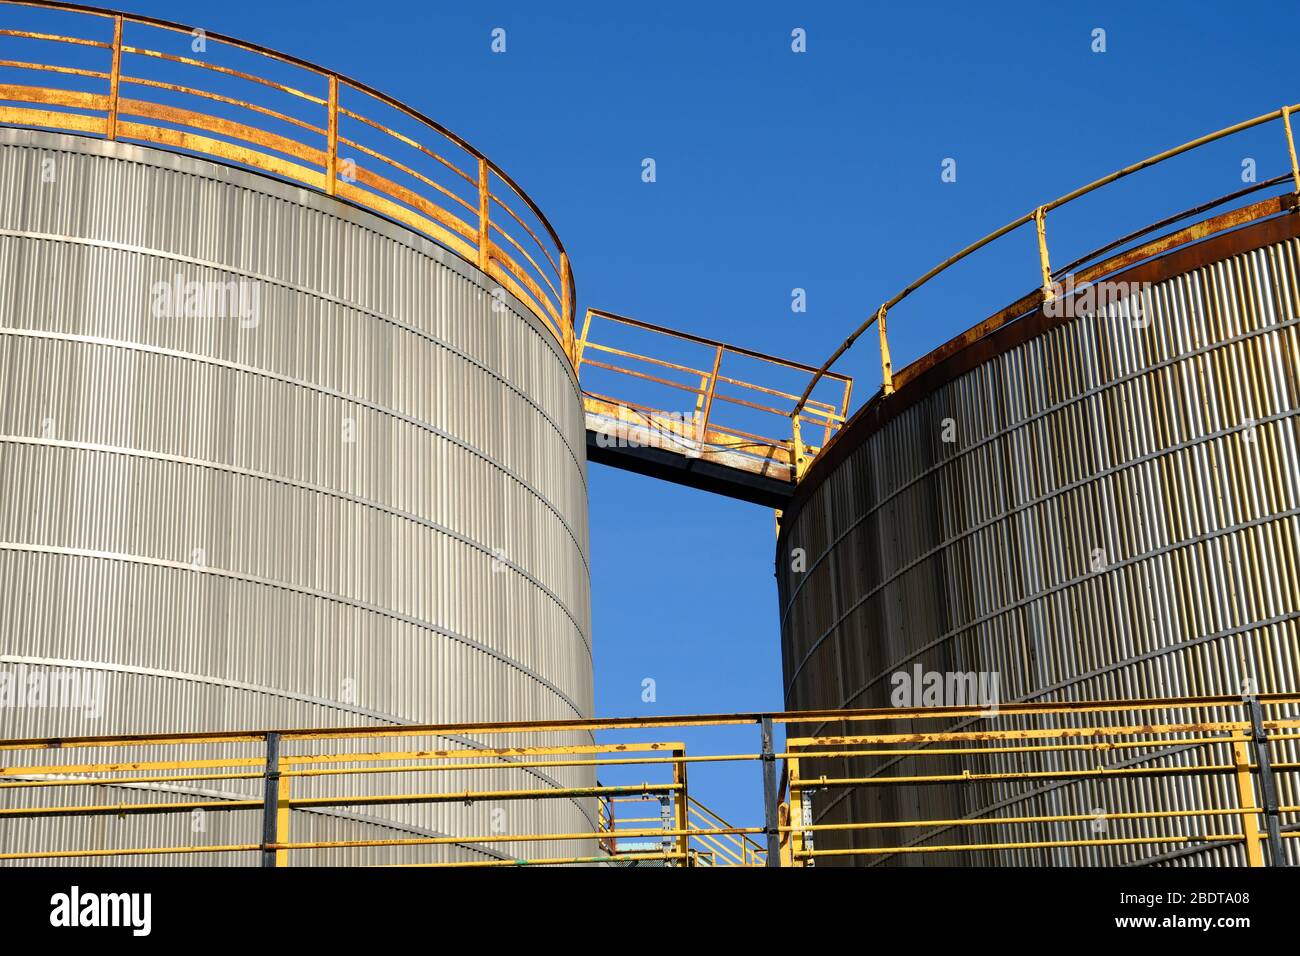 fuel oil storage tanks against a blue sky Stock Photo